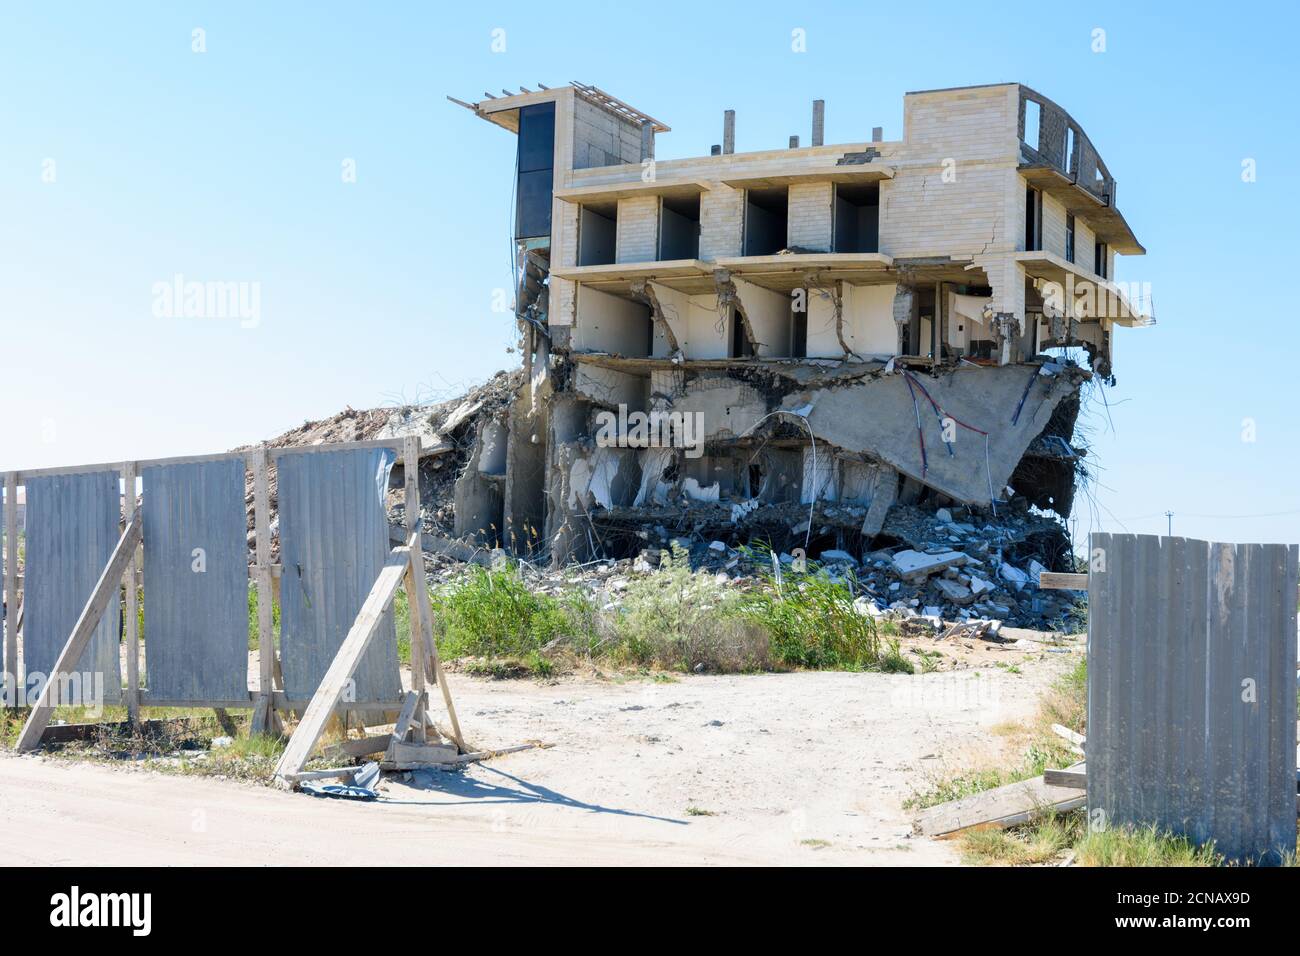 Demolition of an illegally built hotel complex Stock Photo